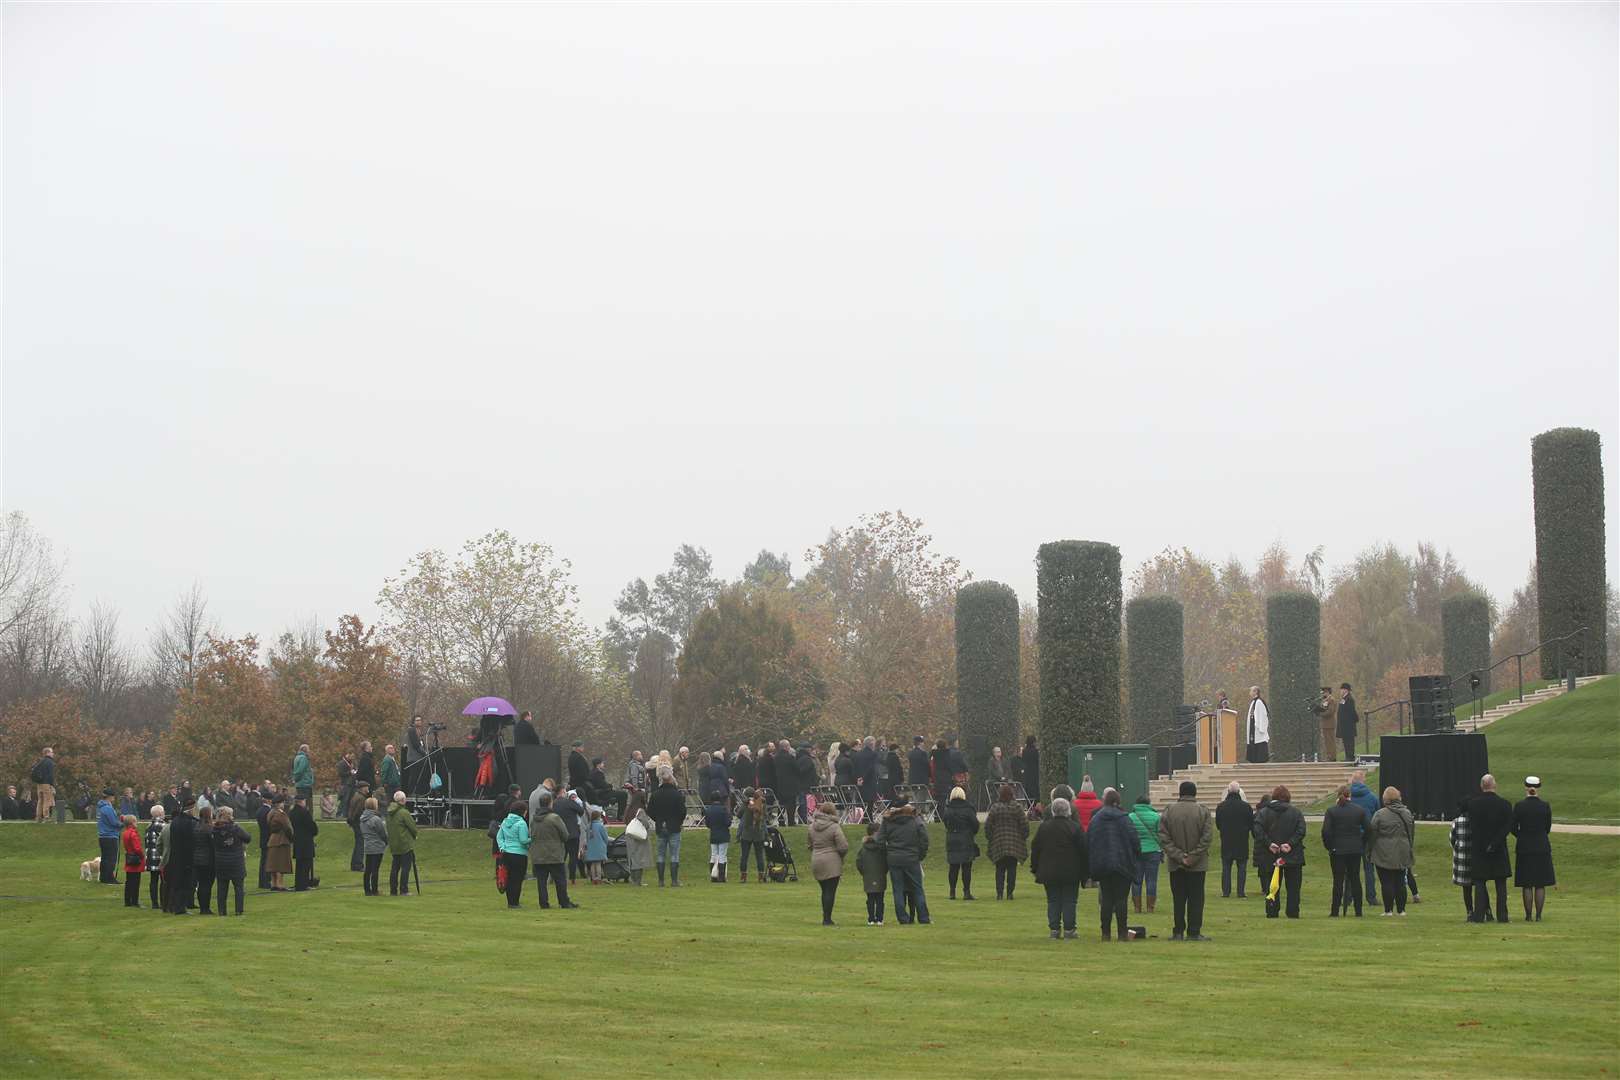 The act of remembrance at the arboretum in Alrewas, Staffordshire, would usually attract thousands (Danny Lawson/PA)